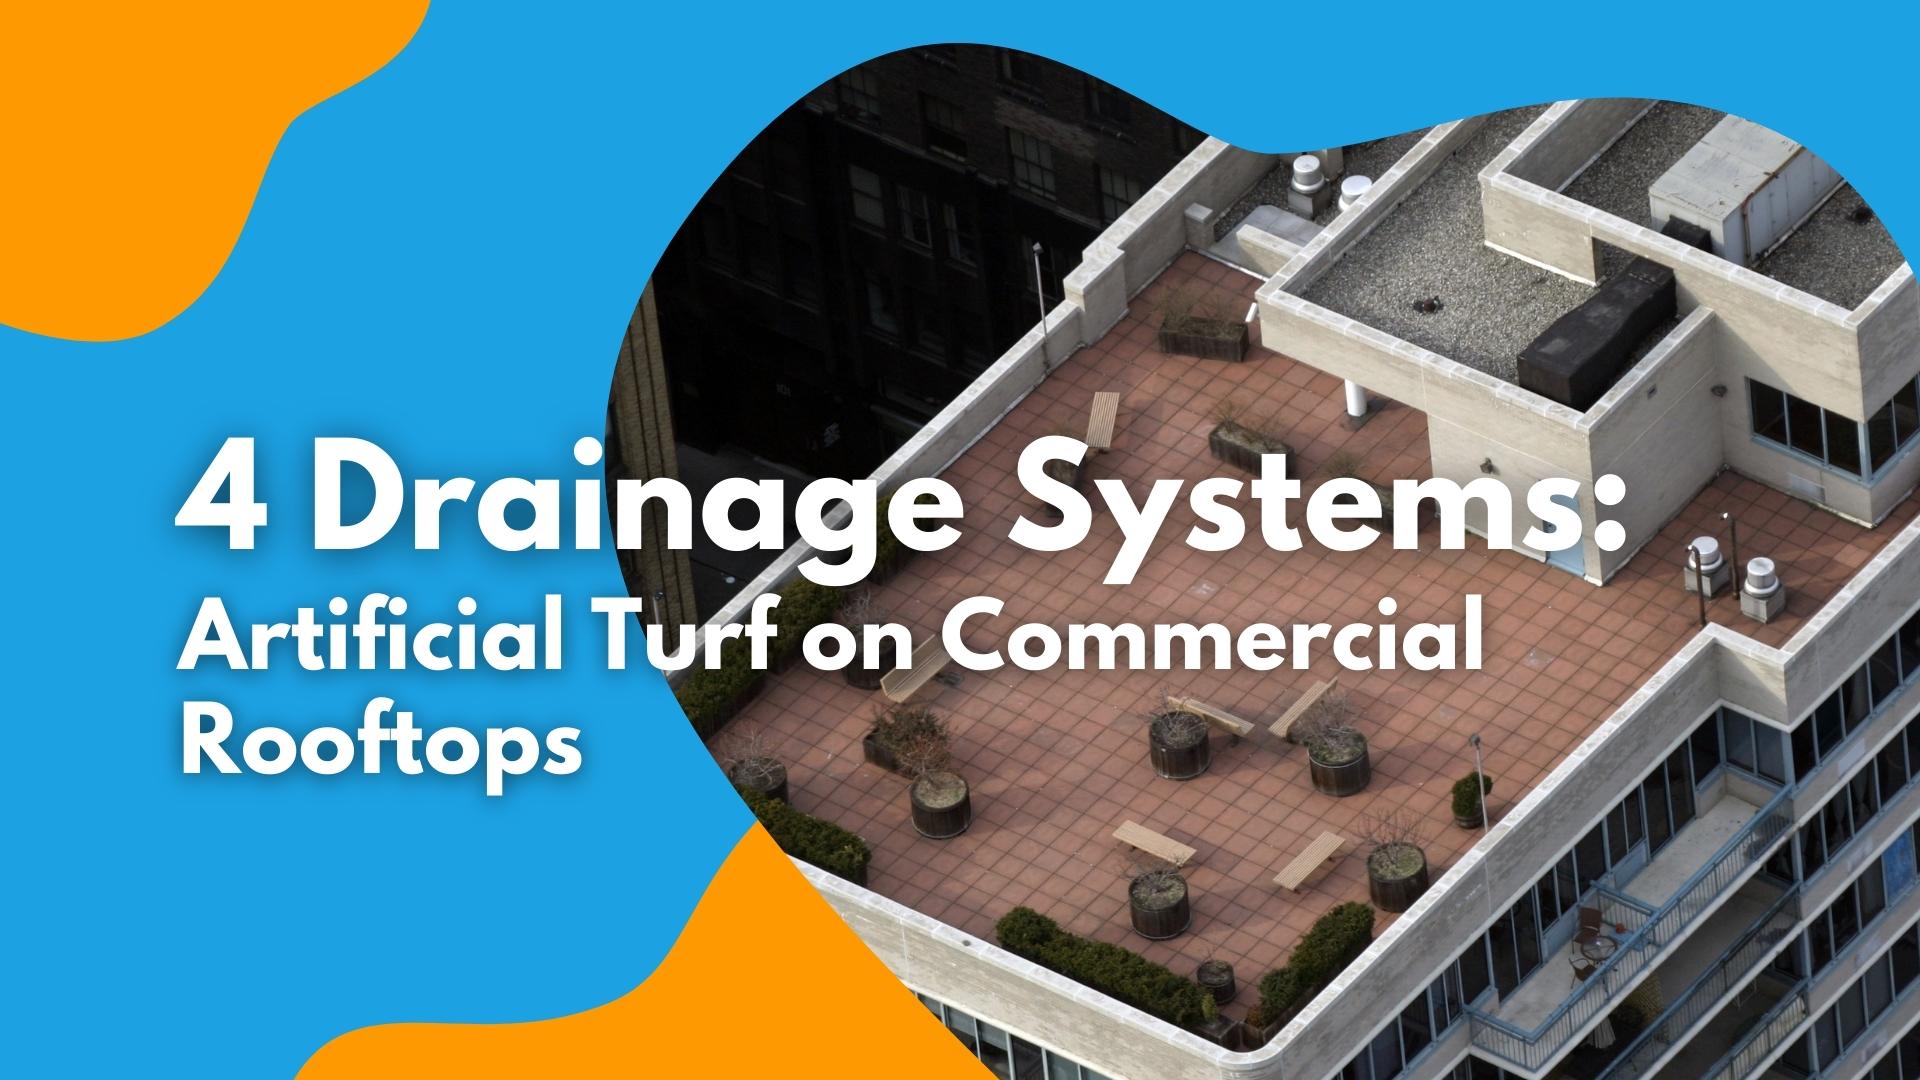 4 Drainage Systems to Install Artificial Grass on Commercial Rooftops